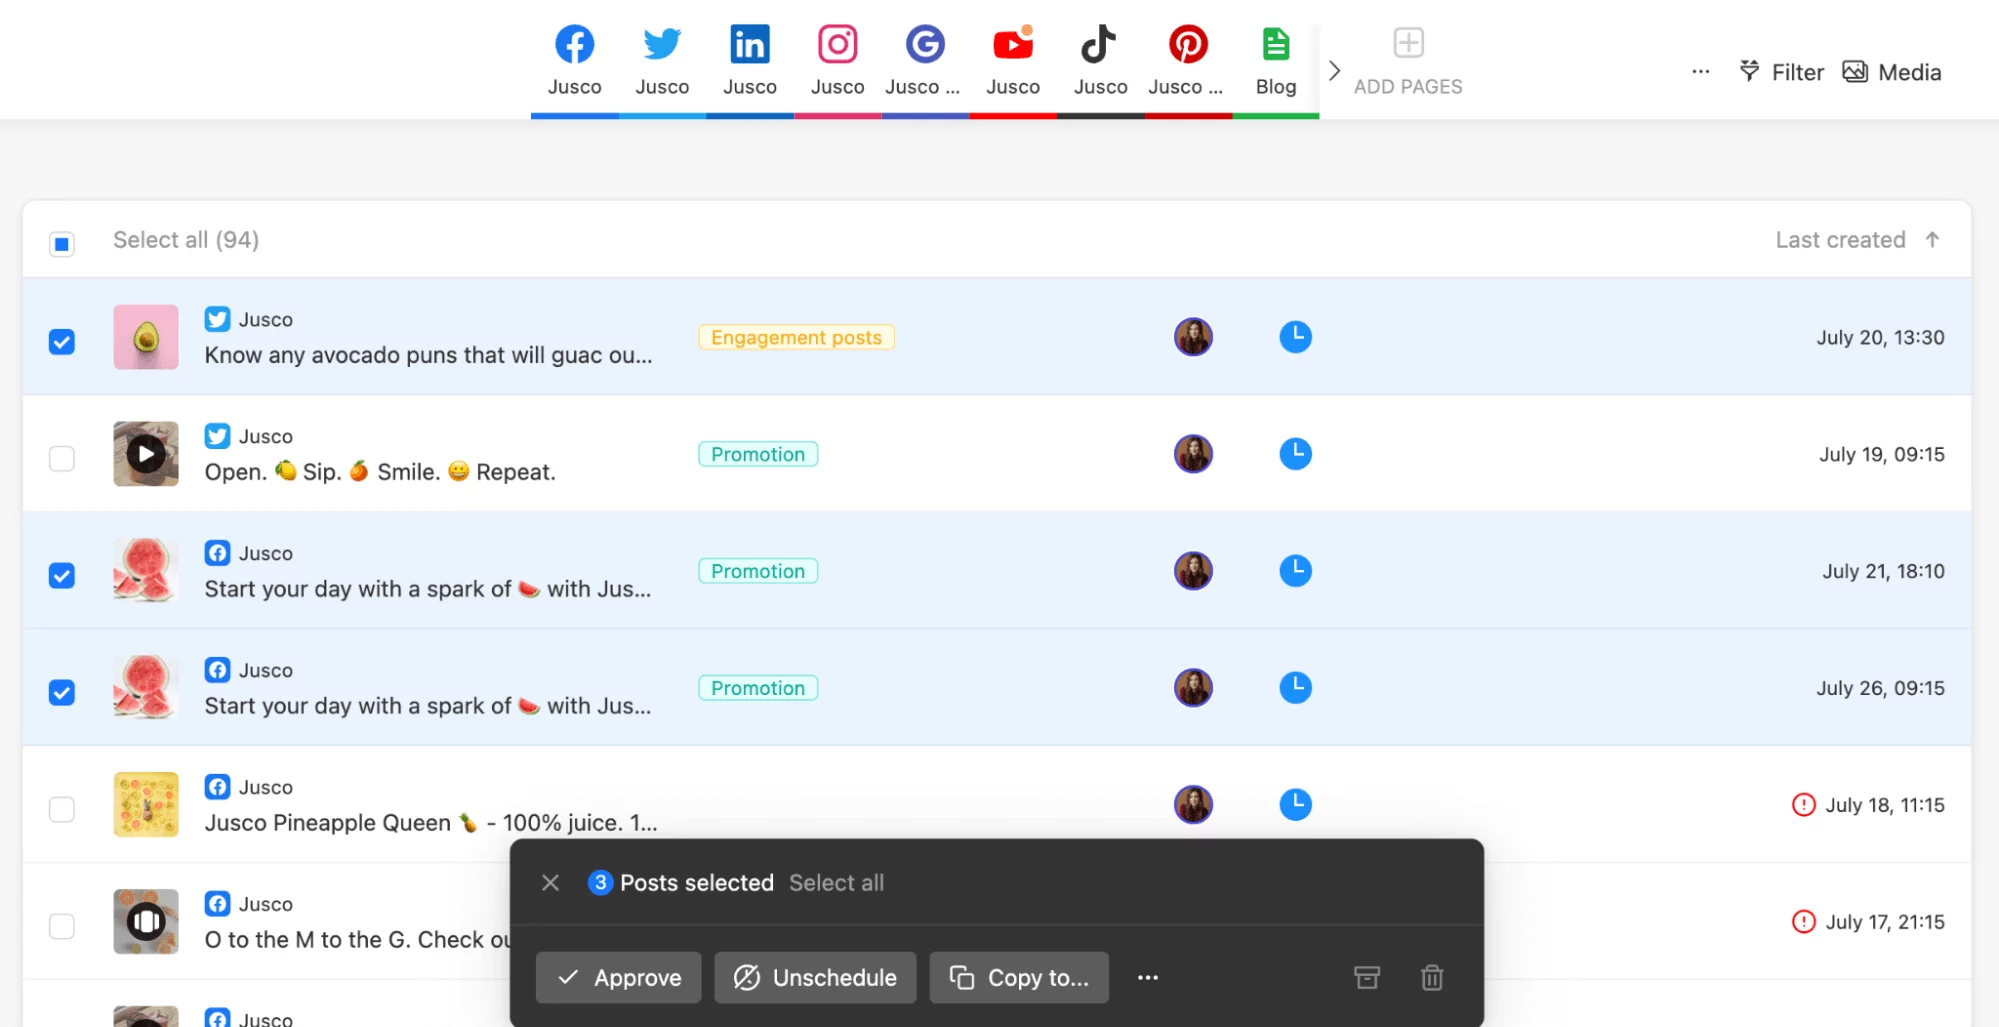 Planable list view of social posts including labels, owners, status and last created dates together with bulk options like select all, approve, or unschedule.